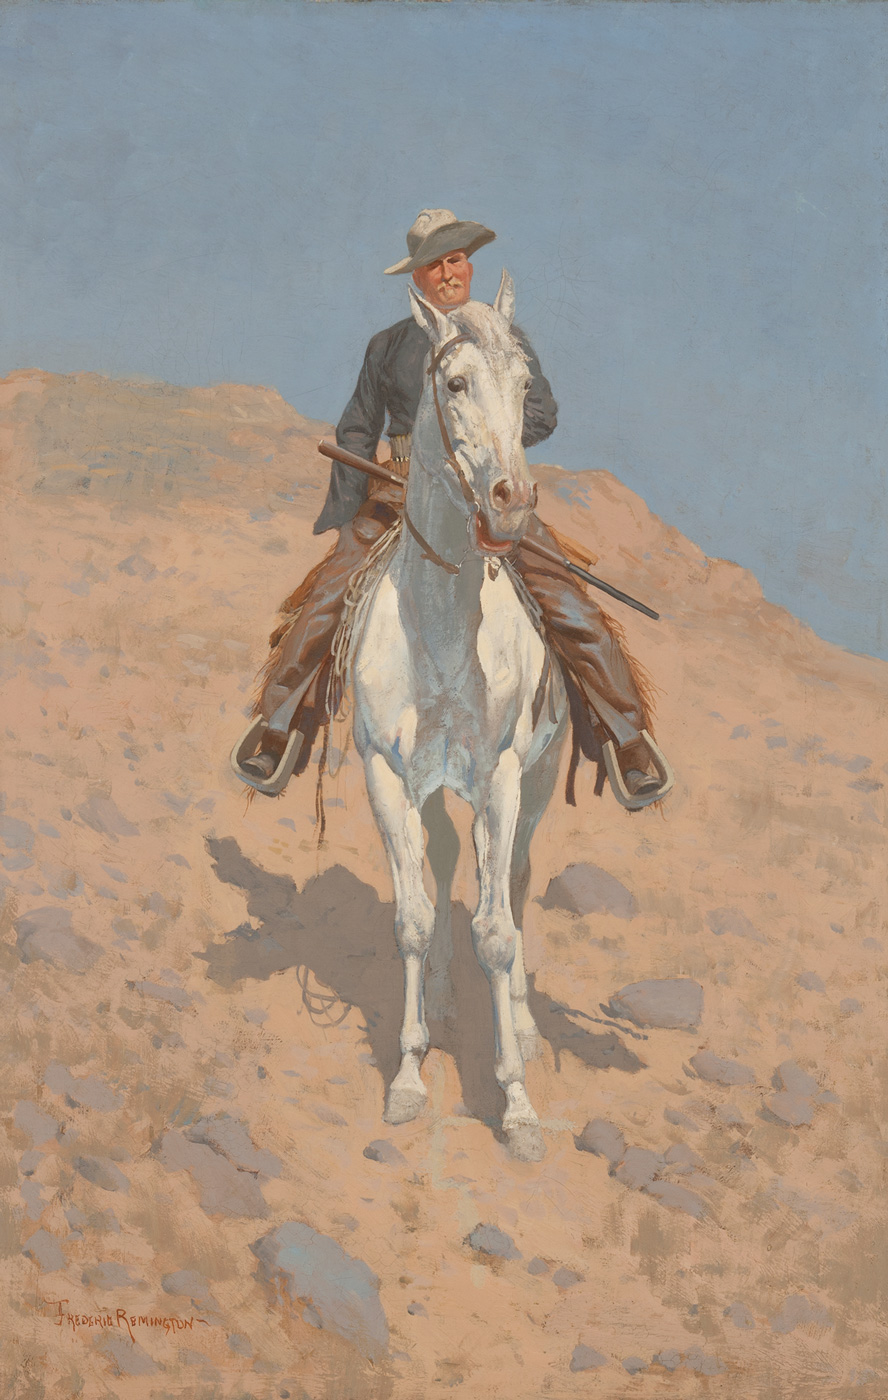 An Anglo man sits on a white horse in a rocky, barren landscape under a blue sky.